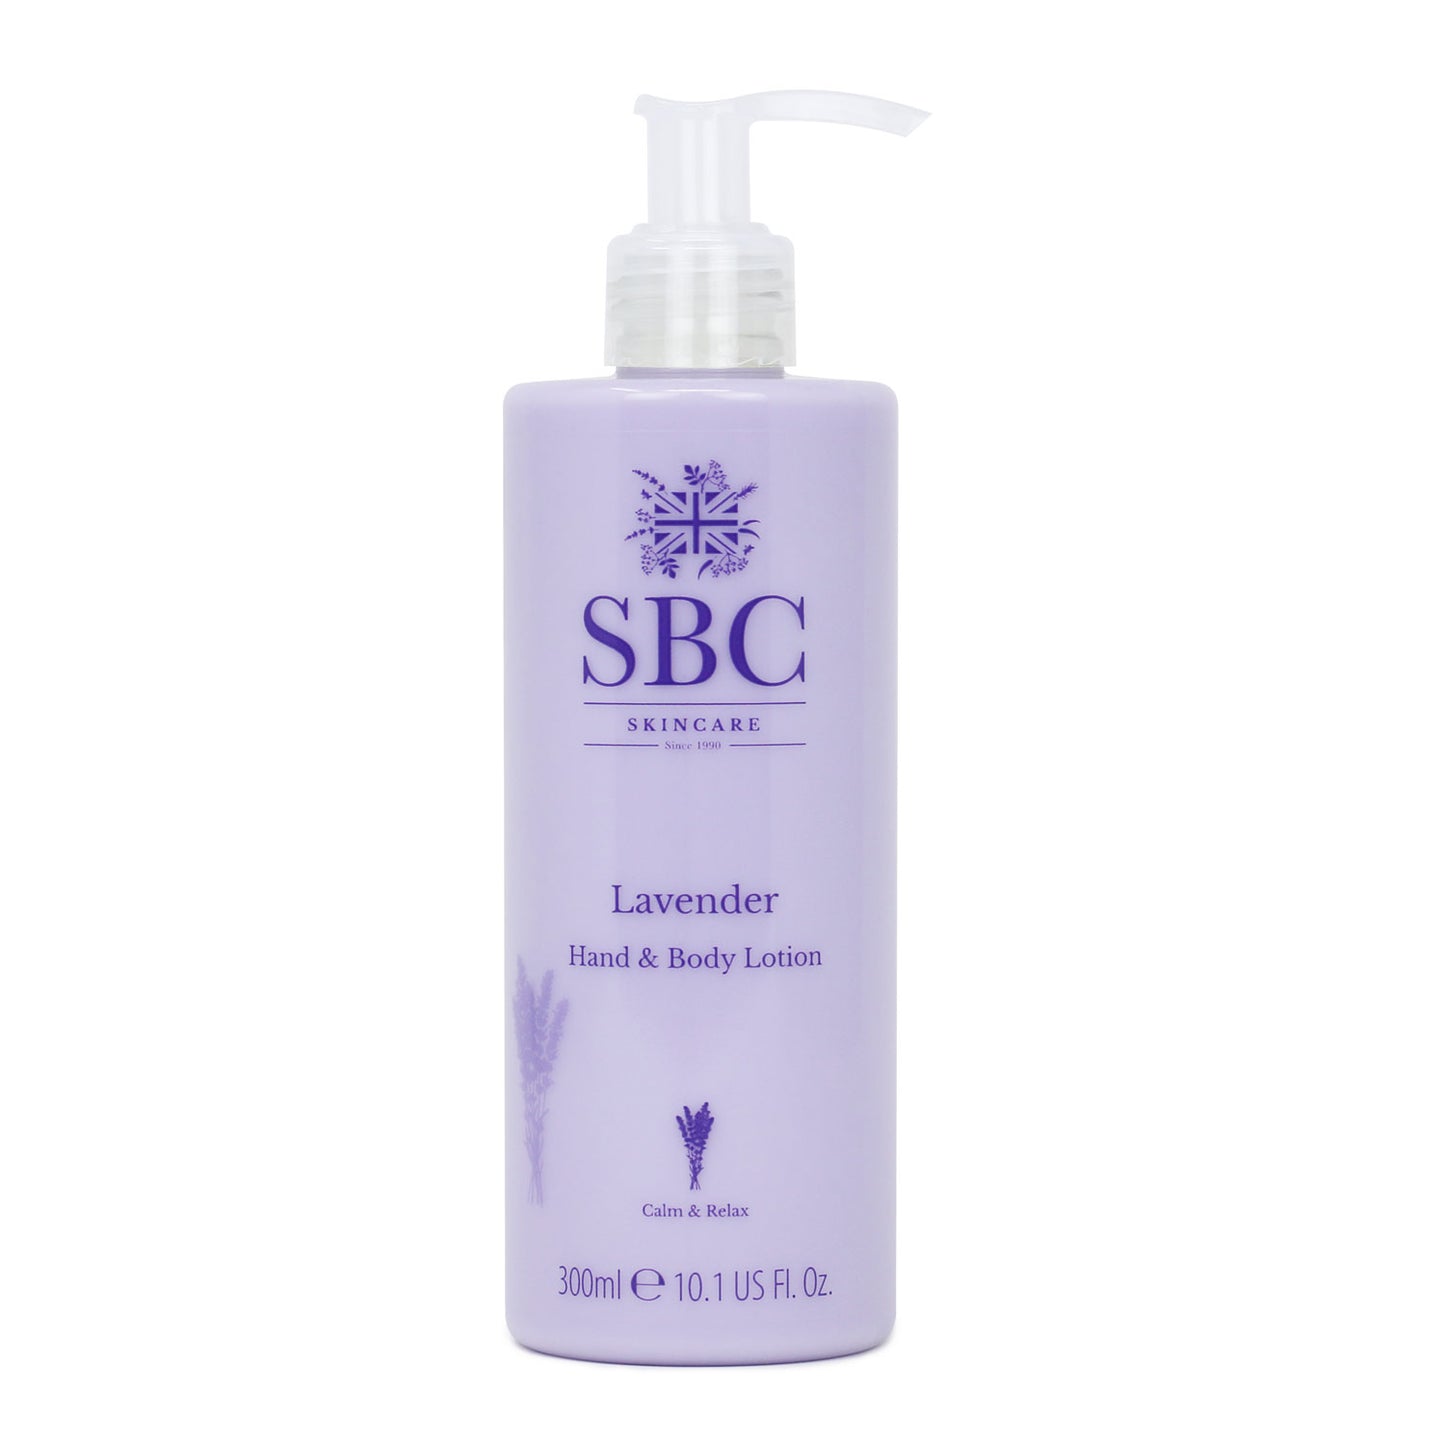 300ml Lavender Hand & Body Lotion on a white background